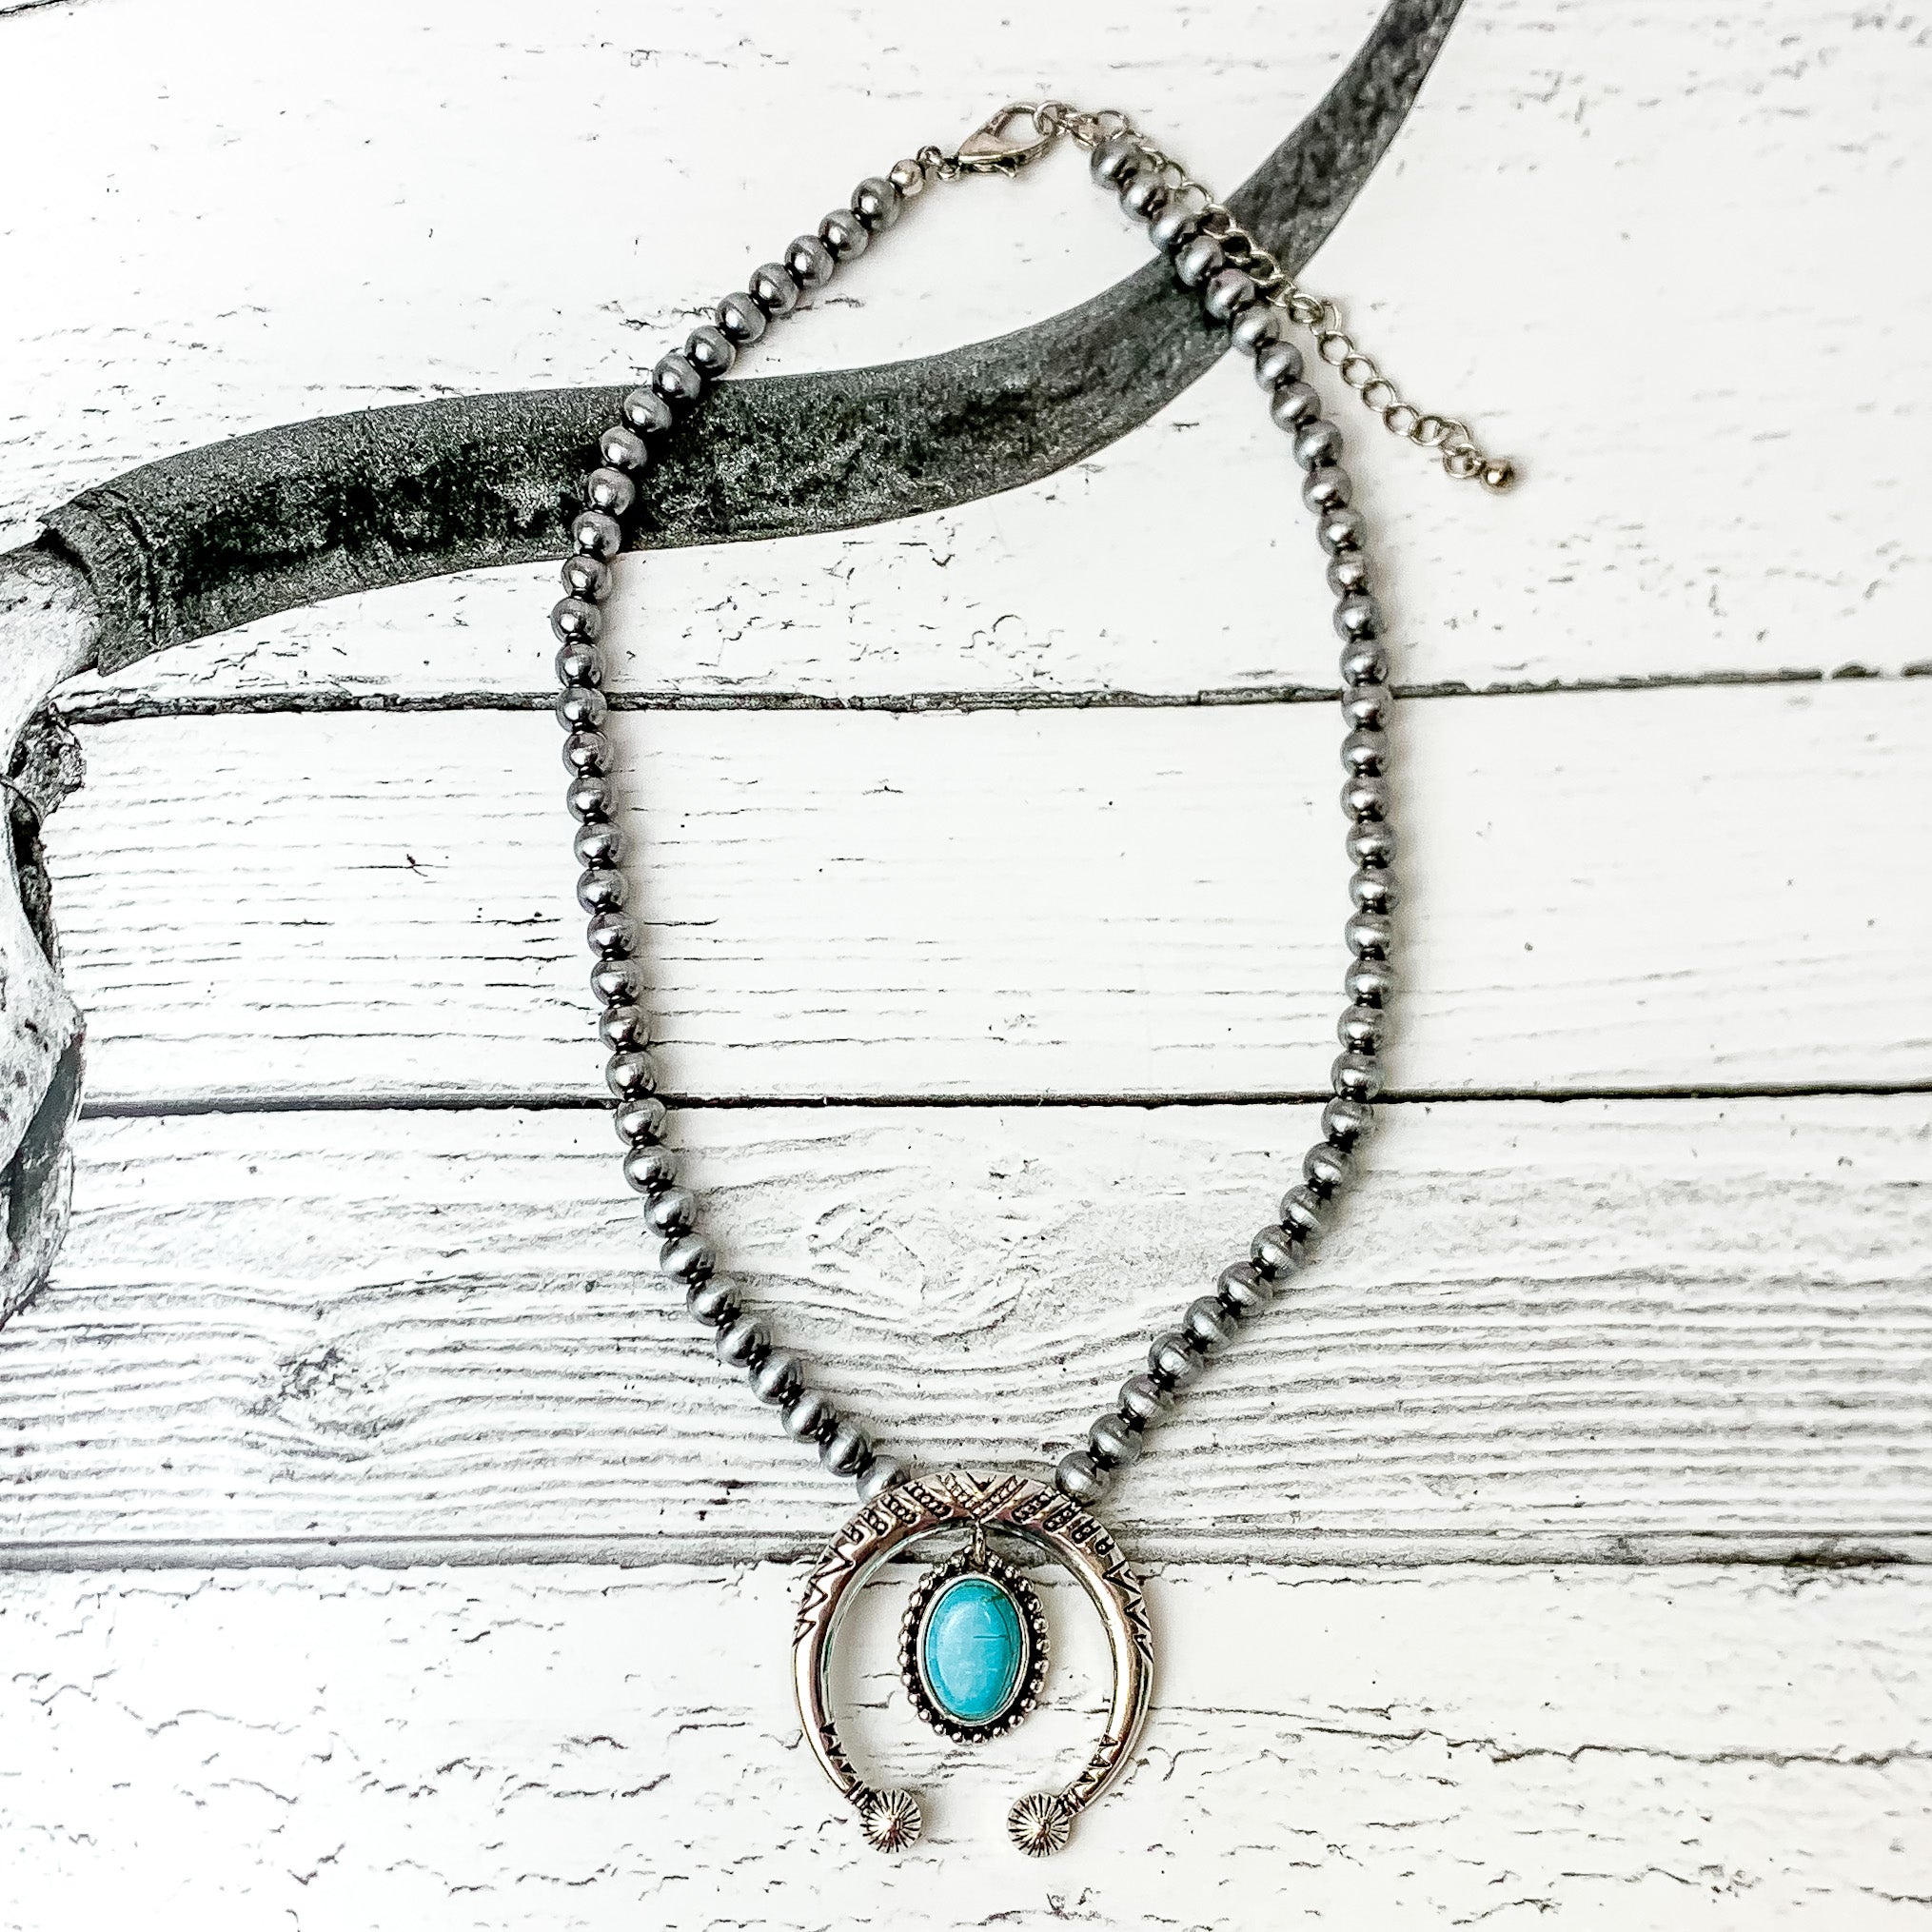 Squash blossom in silver faux navajo pearls with a dangling oval turquoise stone. Pictured on a black and white western photo in the background.